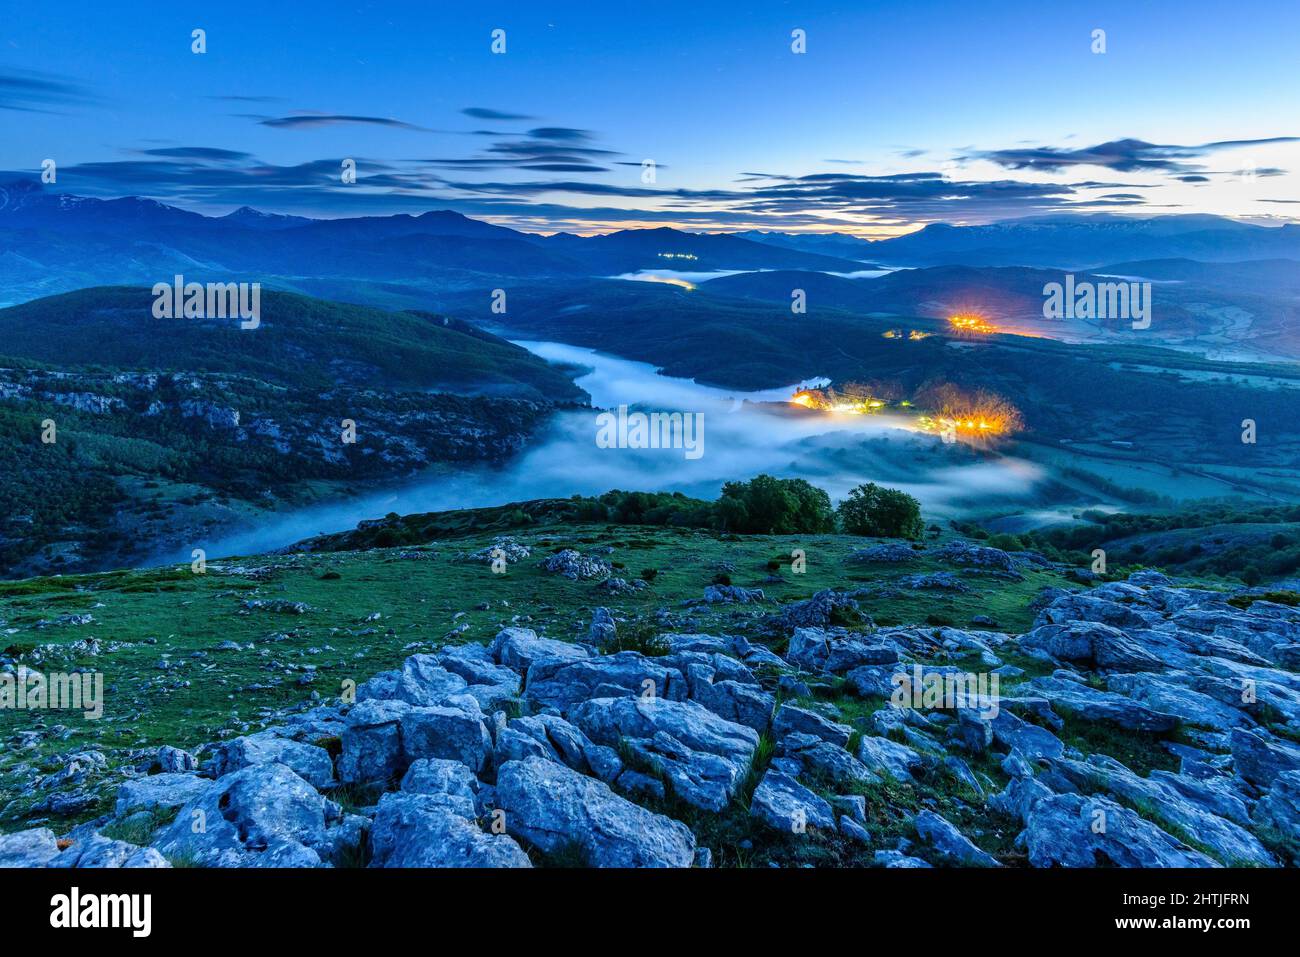 Breathtaking landscape of calm river flowing through mountainous valley in town under cloudy twilight sky in Palentian Mountains in Spain Stock Photo